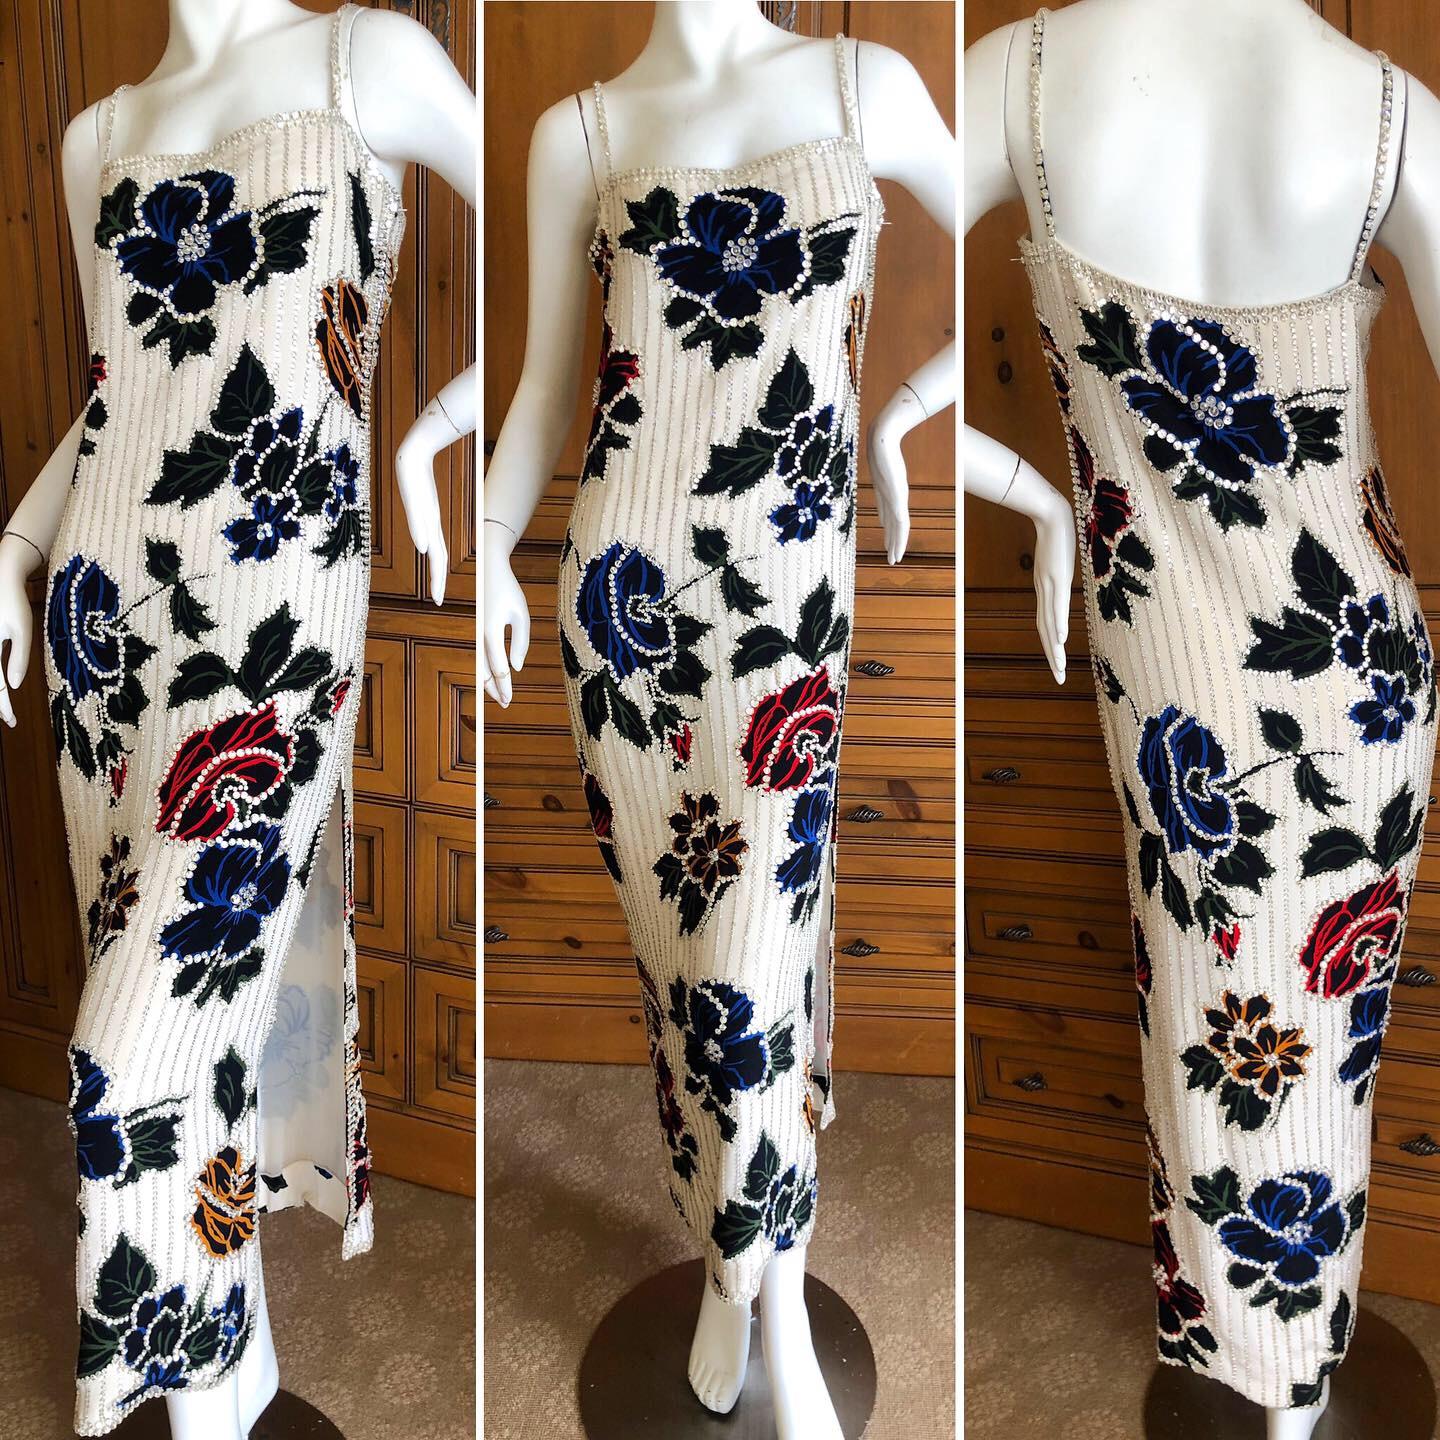 James Galanos Applique Silk Floral Swarovski Crystal Trimmed Dress and Shawl 
This is so beautiful, entirely embellished with crystals, it has a high side slit.
 Size Small, no size label
 Bust 34